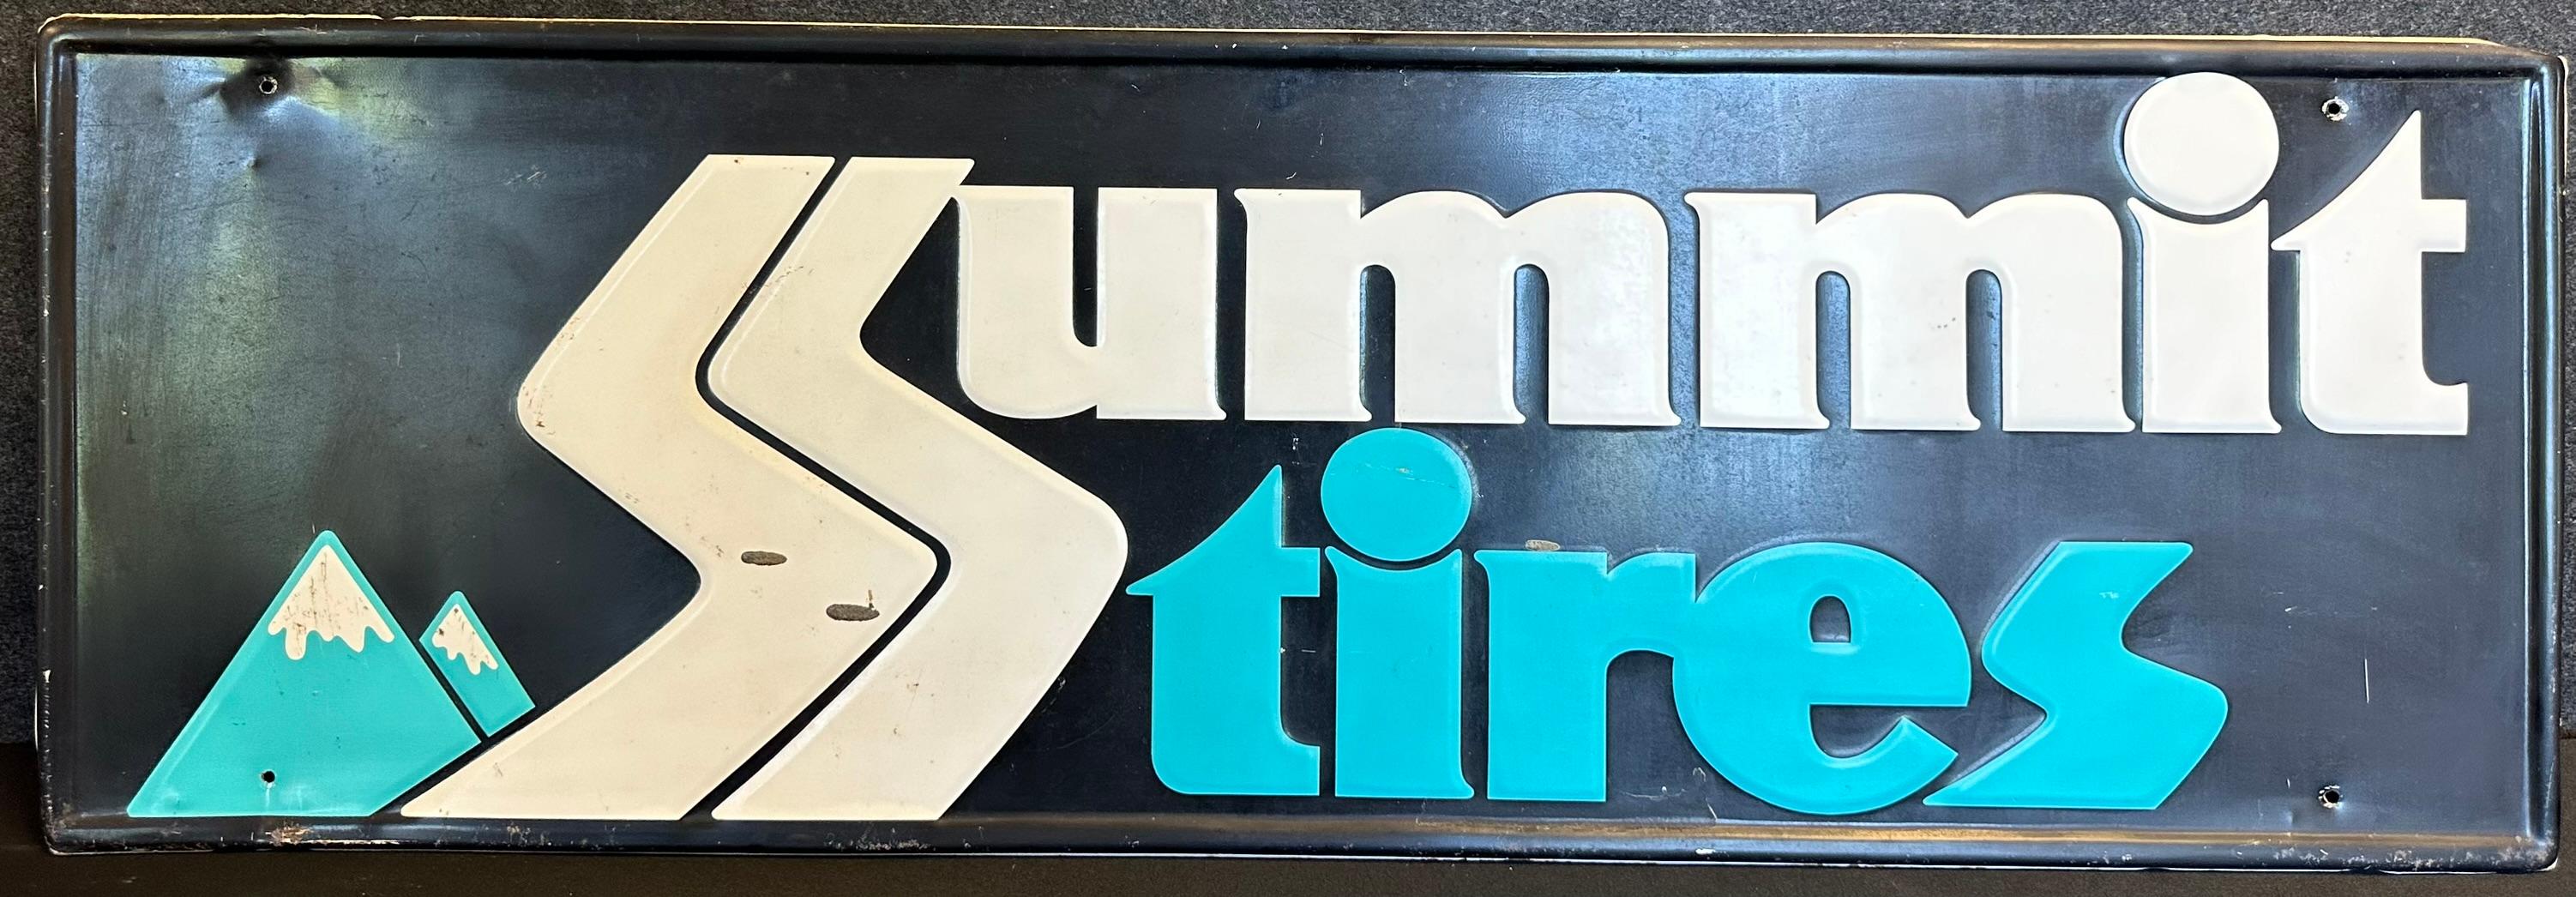 Summit Tires Embossed Advertising Sign Ca. 1970s